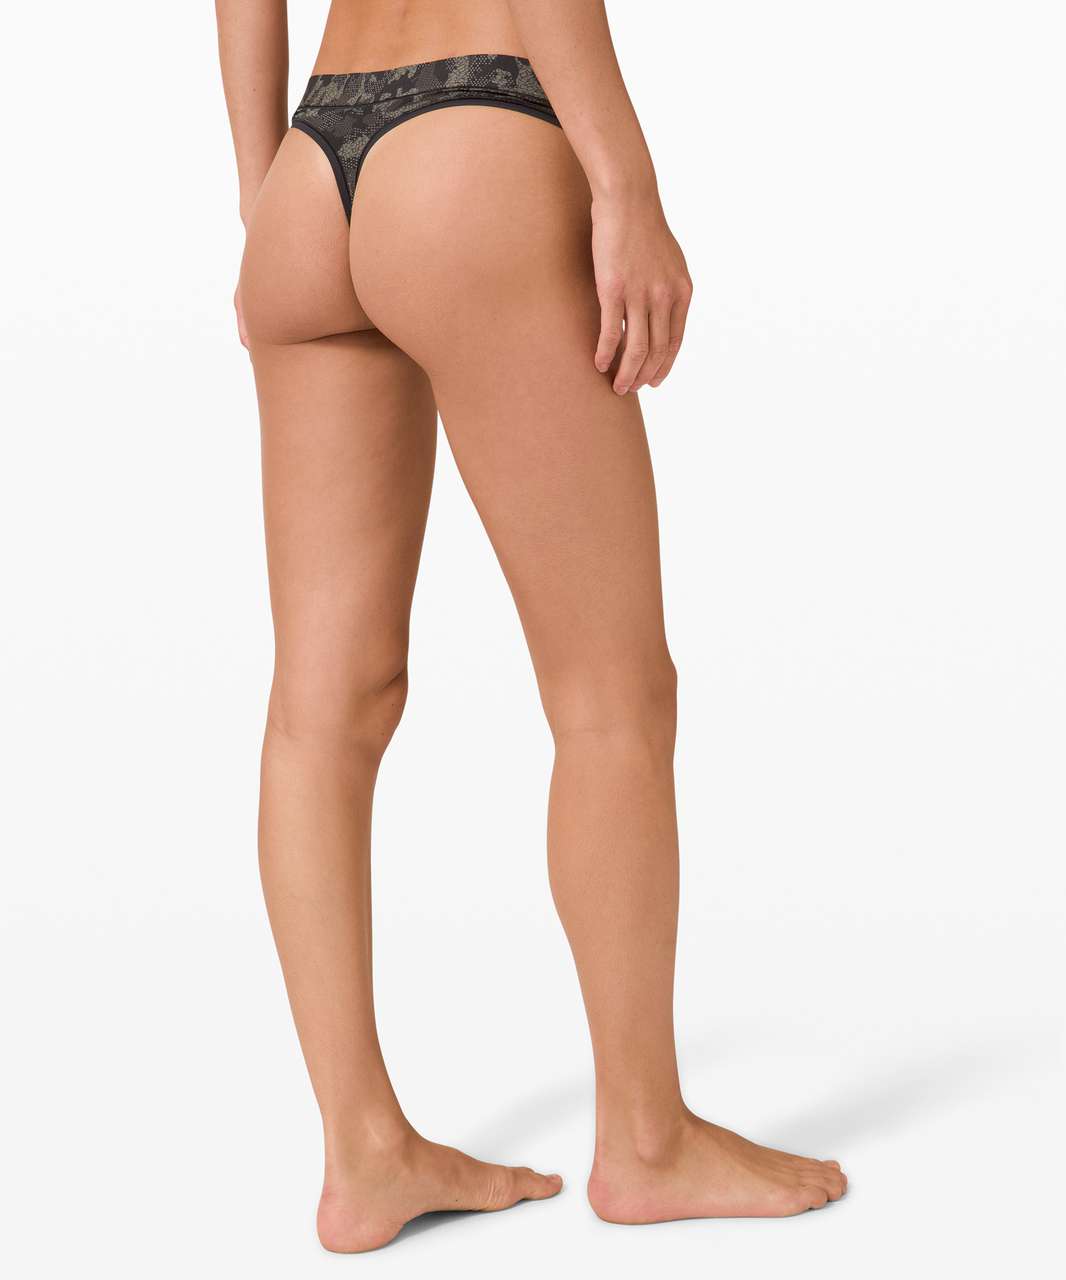 Lululemon Smooth Seamless Thong *3 Pack - Black / Watermelon Red